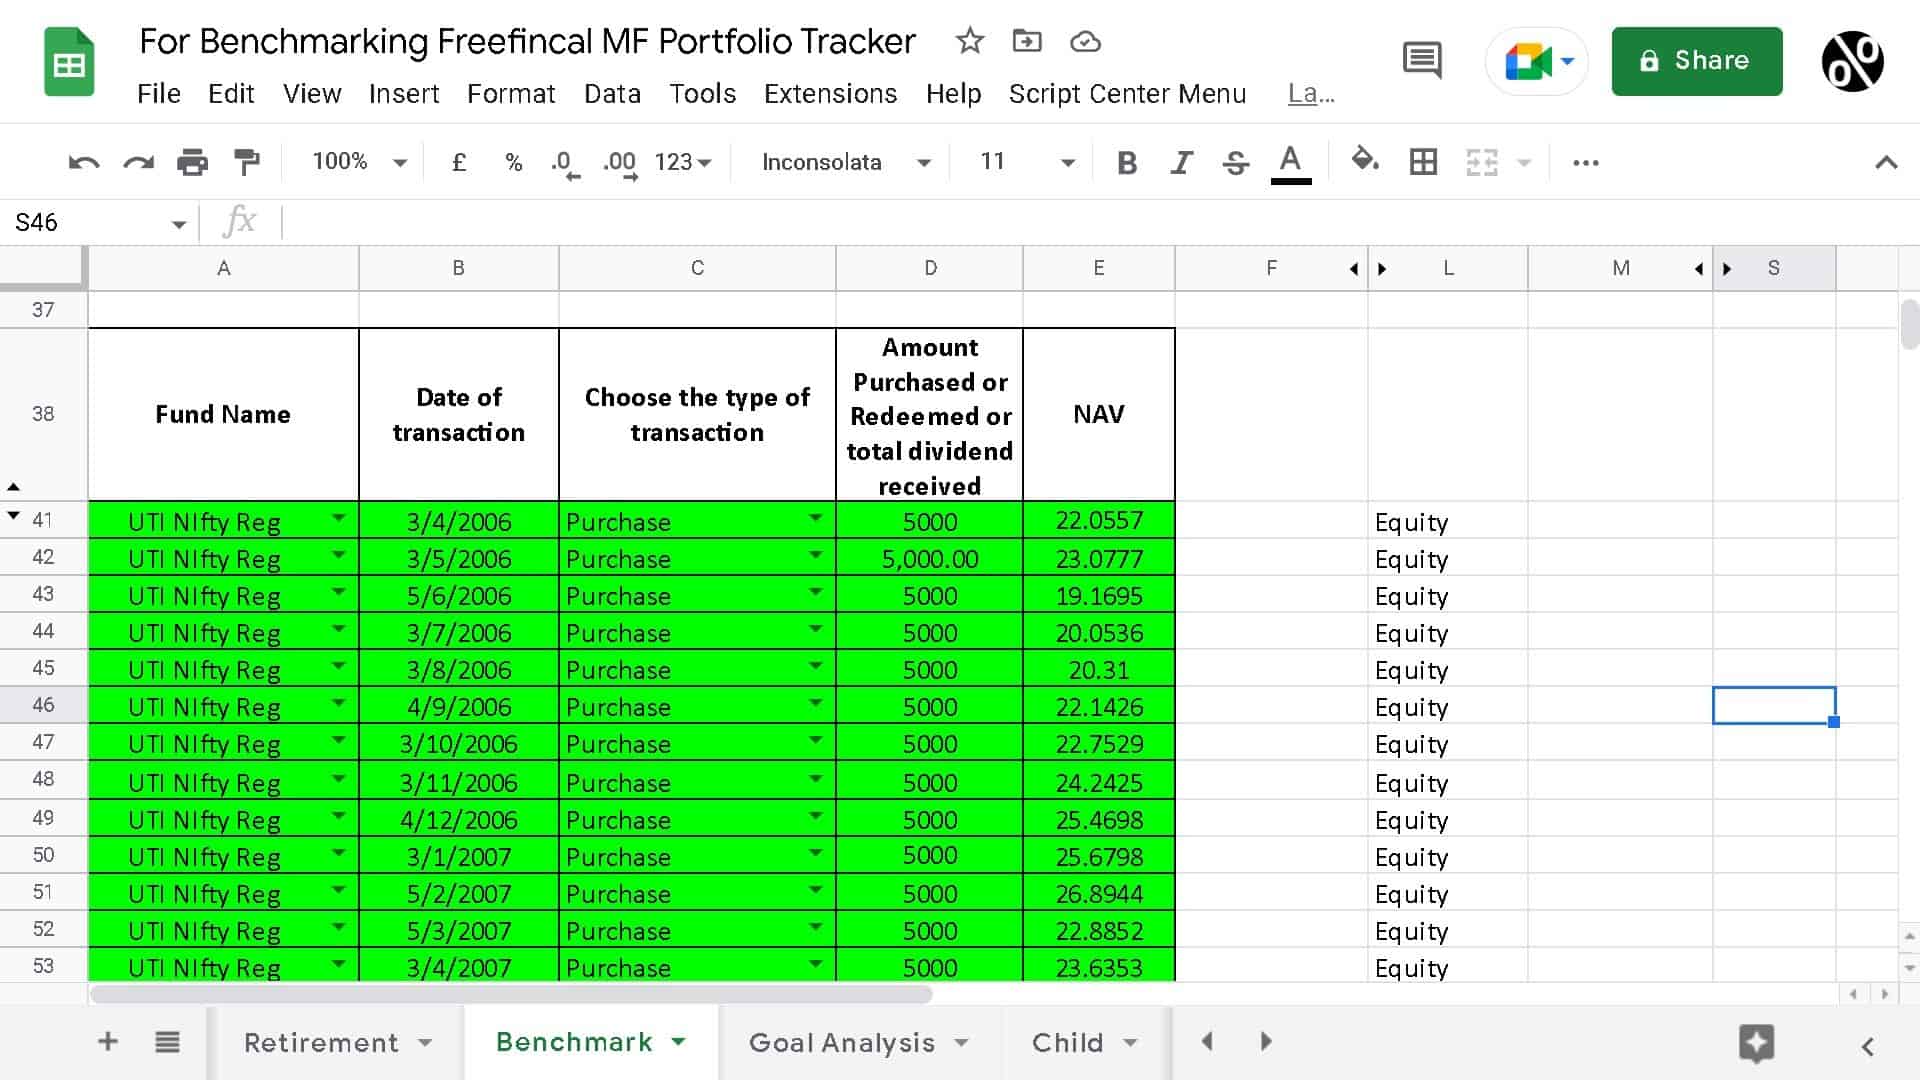 Benchmark mutual fund transactions with NAV in the tracker sheet